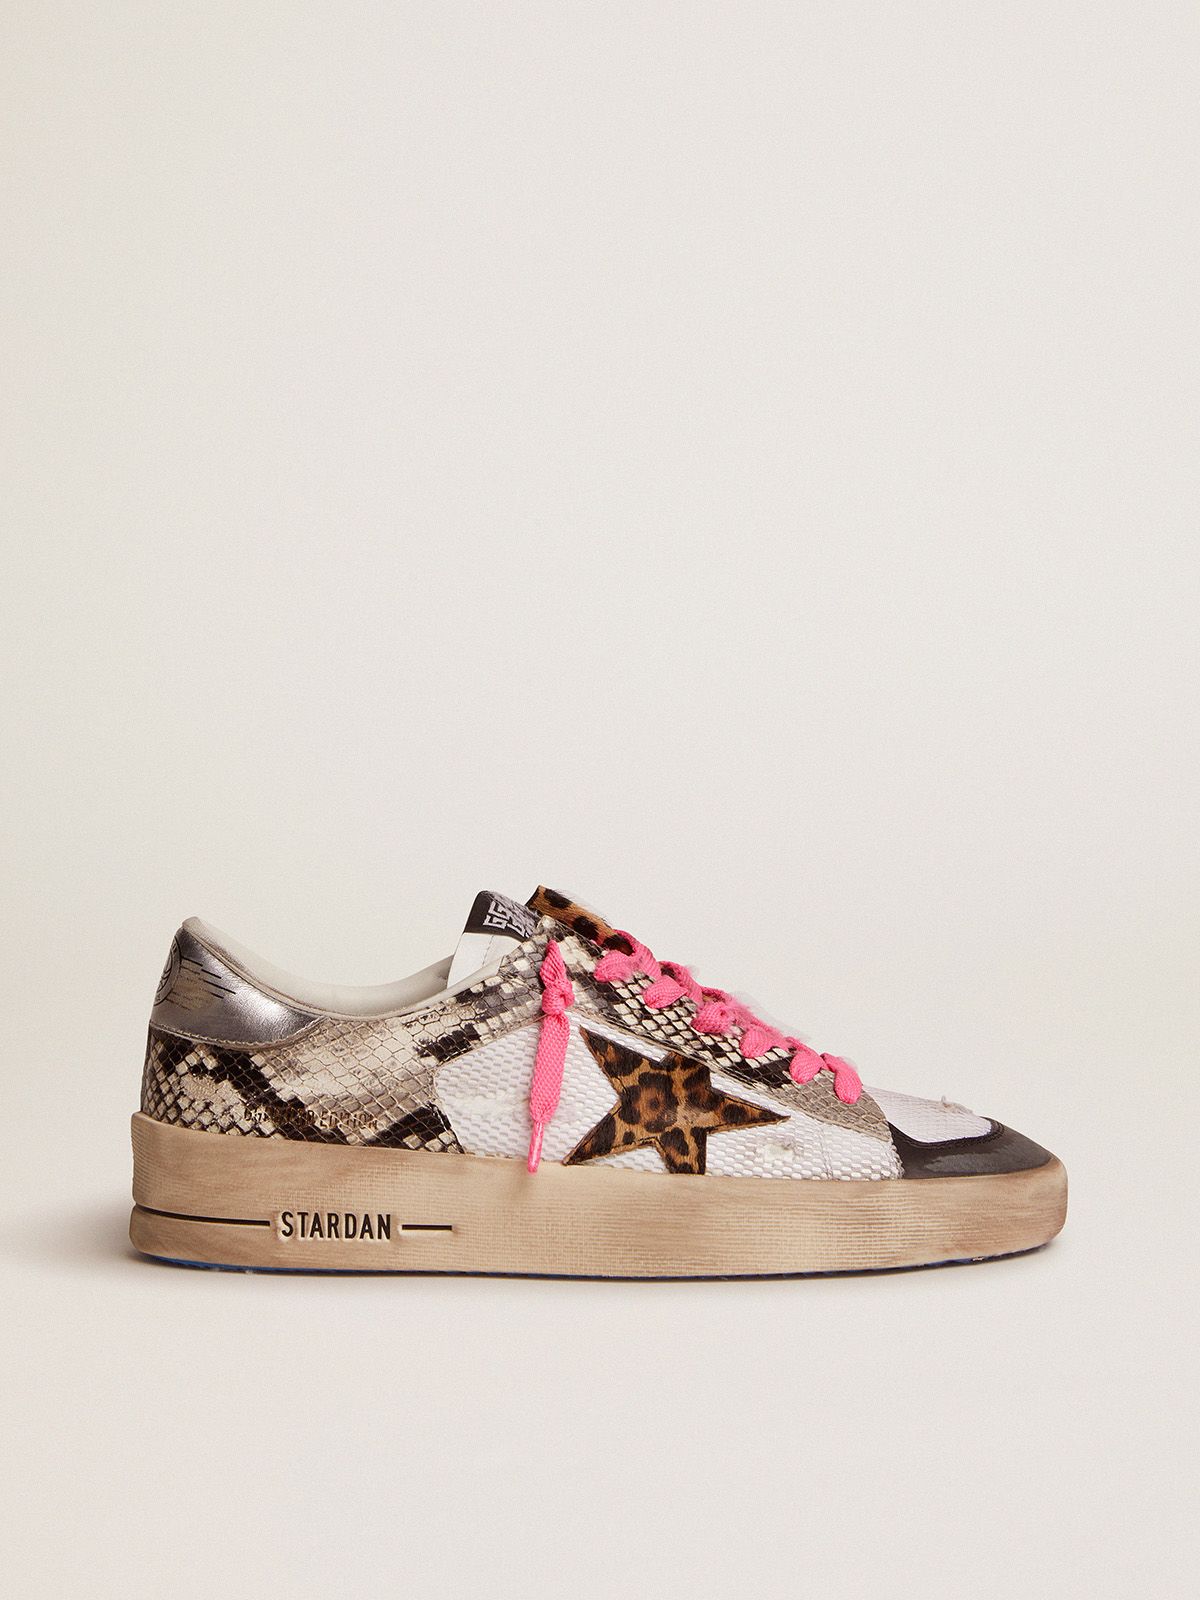 Stardan LAB sneakers with snake-print leather upper and leopard-print pony skin star | 